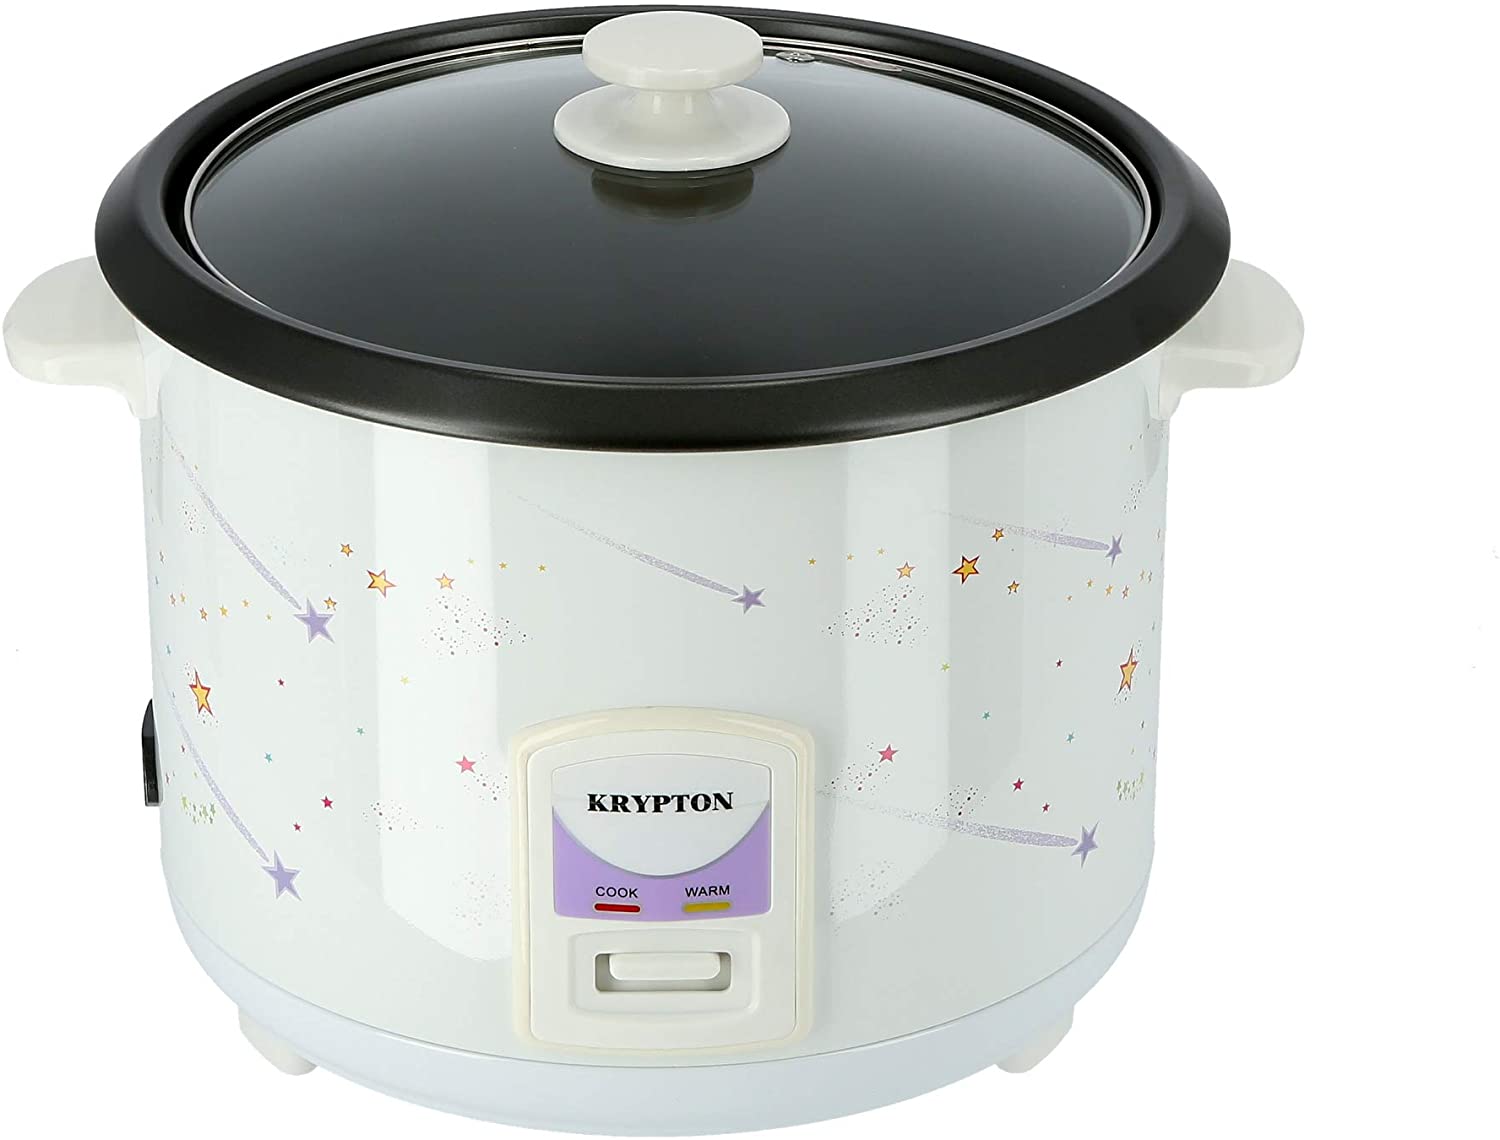 Krypton 2.8 Liter Electric Rice Cooker With NonStick Innerpot White